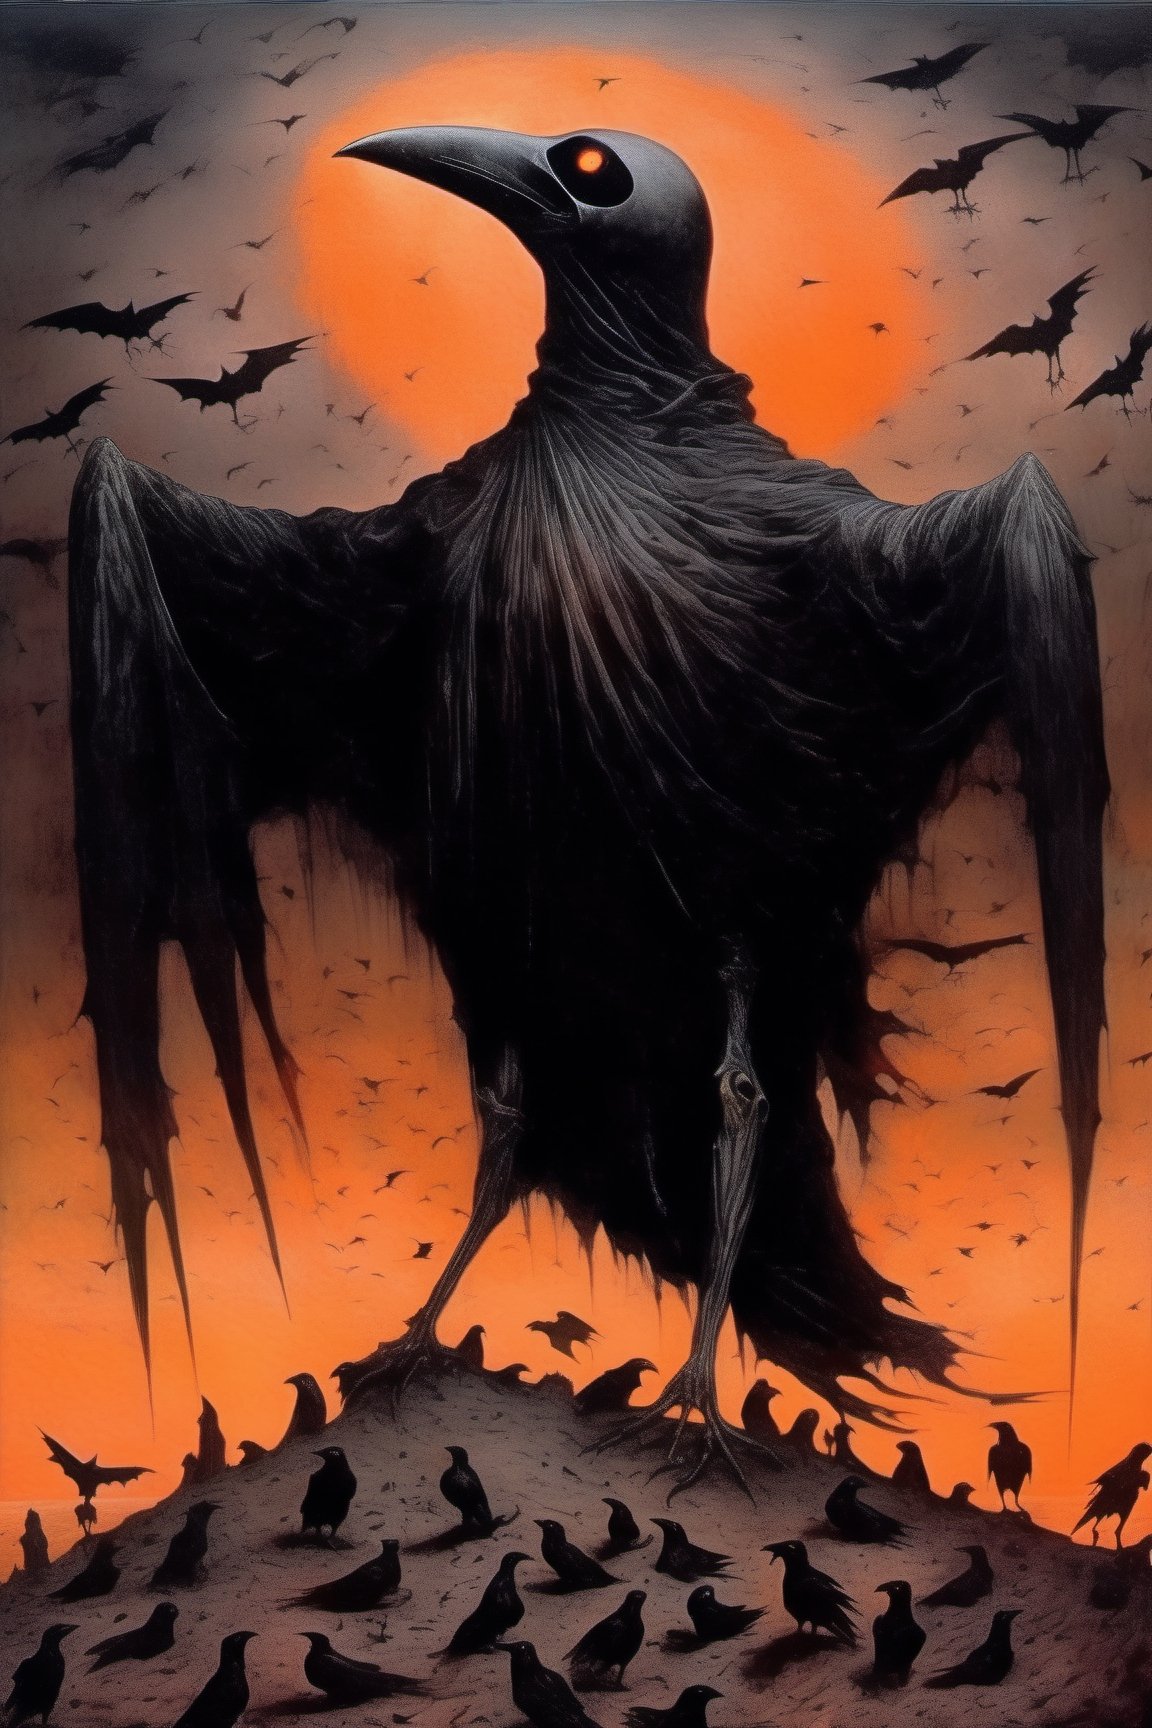 ((The Emperor of Darkness comes down from the sky)). Flocks of flying crows, corpses emerging from the ground, Tenebrism, strange, multi-toned orange and black gradient tumultuous sky, dark core, moderately controlled chaos, ghost core, Nicholas Samori